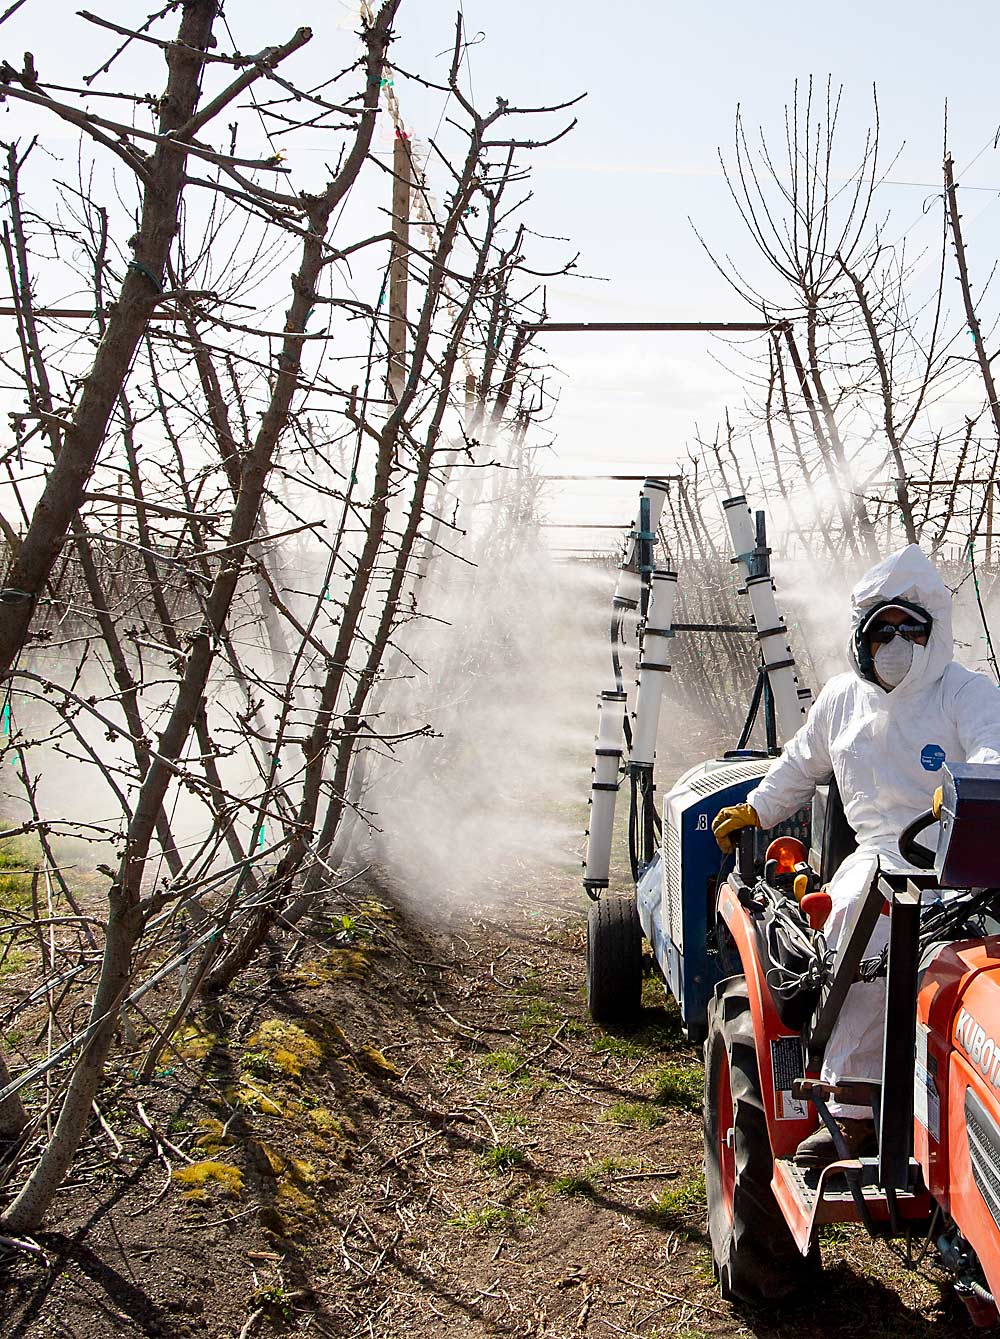 An orchard employee sprays a plant-based dispersion on Early Robin cherry buds in March 2020 at a Pasco, Washington, cherry orchard. WSU researchers are commercializing the dispersion, which they previously called cellulose nanocrystals, that insulates fruit buds from frost damage. (Ross Courtney/Good Fruit Grower)